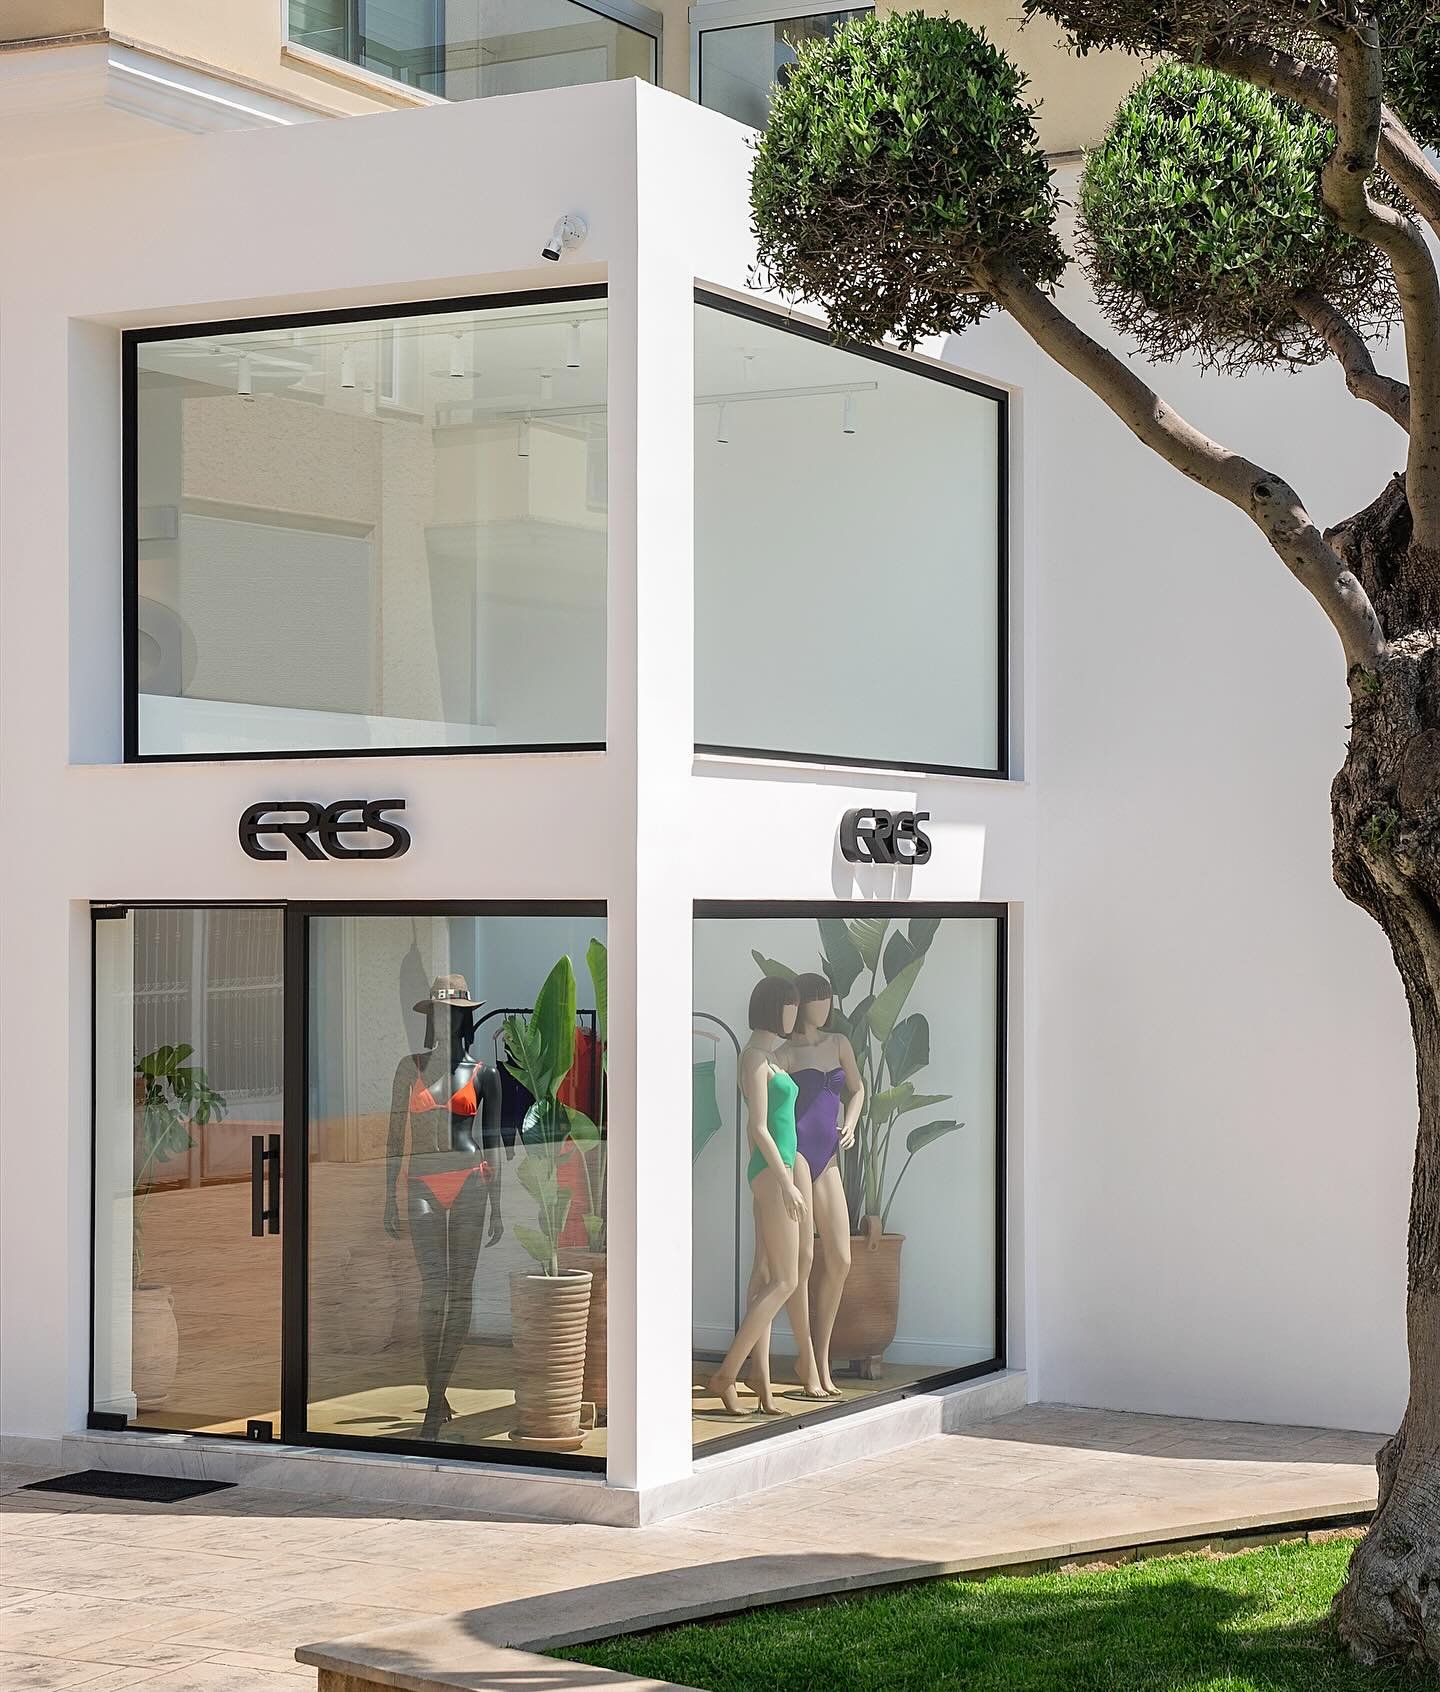 As we officially open the doors to the new @ERES Flagship store in Cyprus, we gratefully welcome you to discover the new collection and sophisticated pieces that lie within the French labels presence. 

Find ERES located next to our Splash Boutiques 